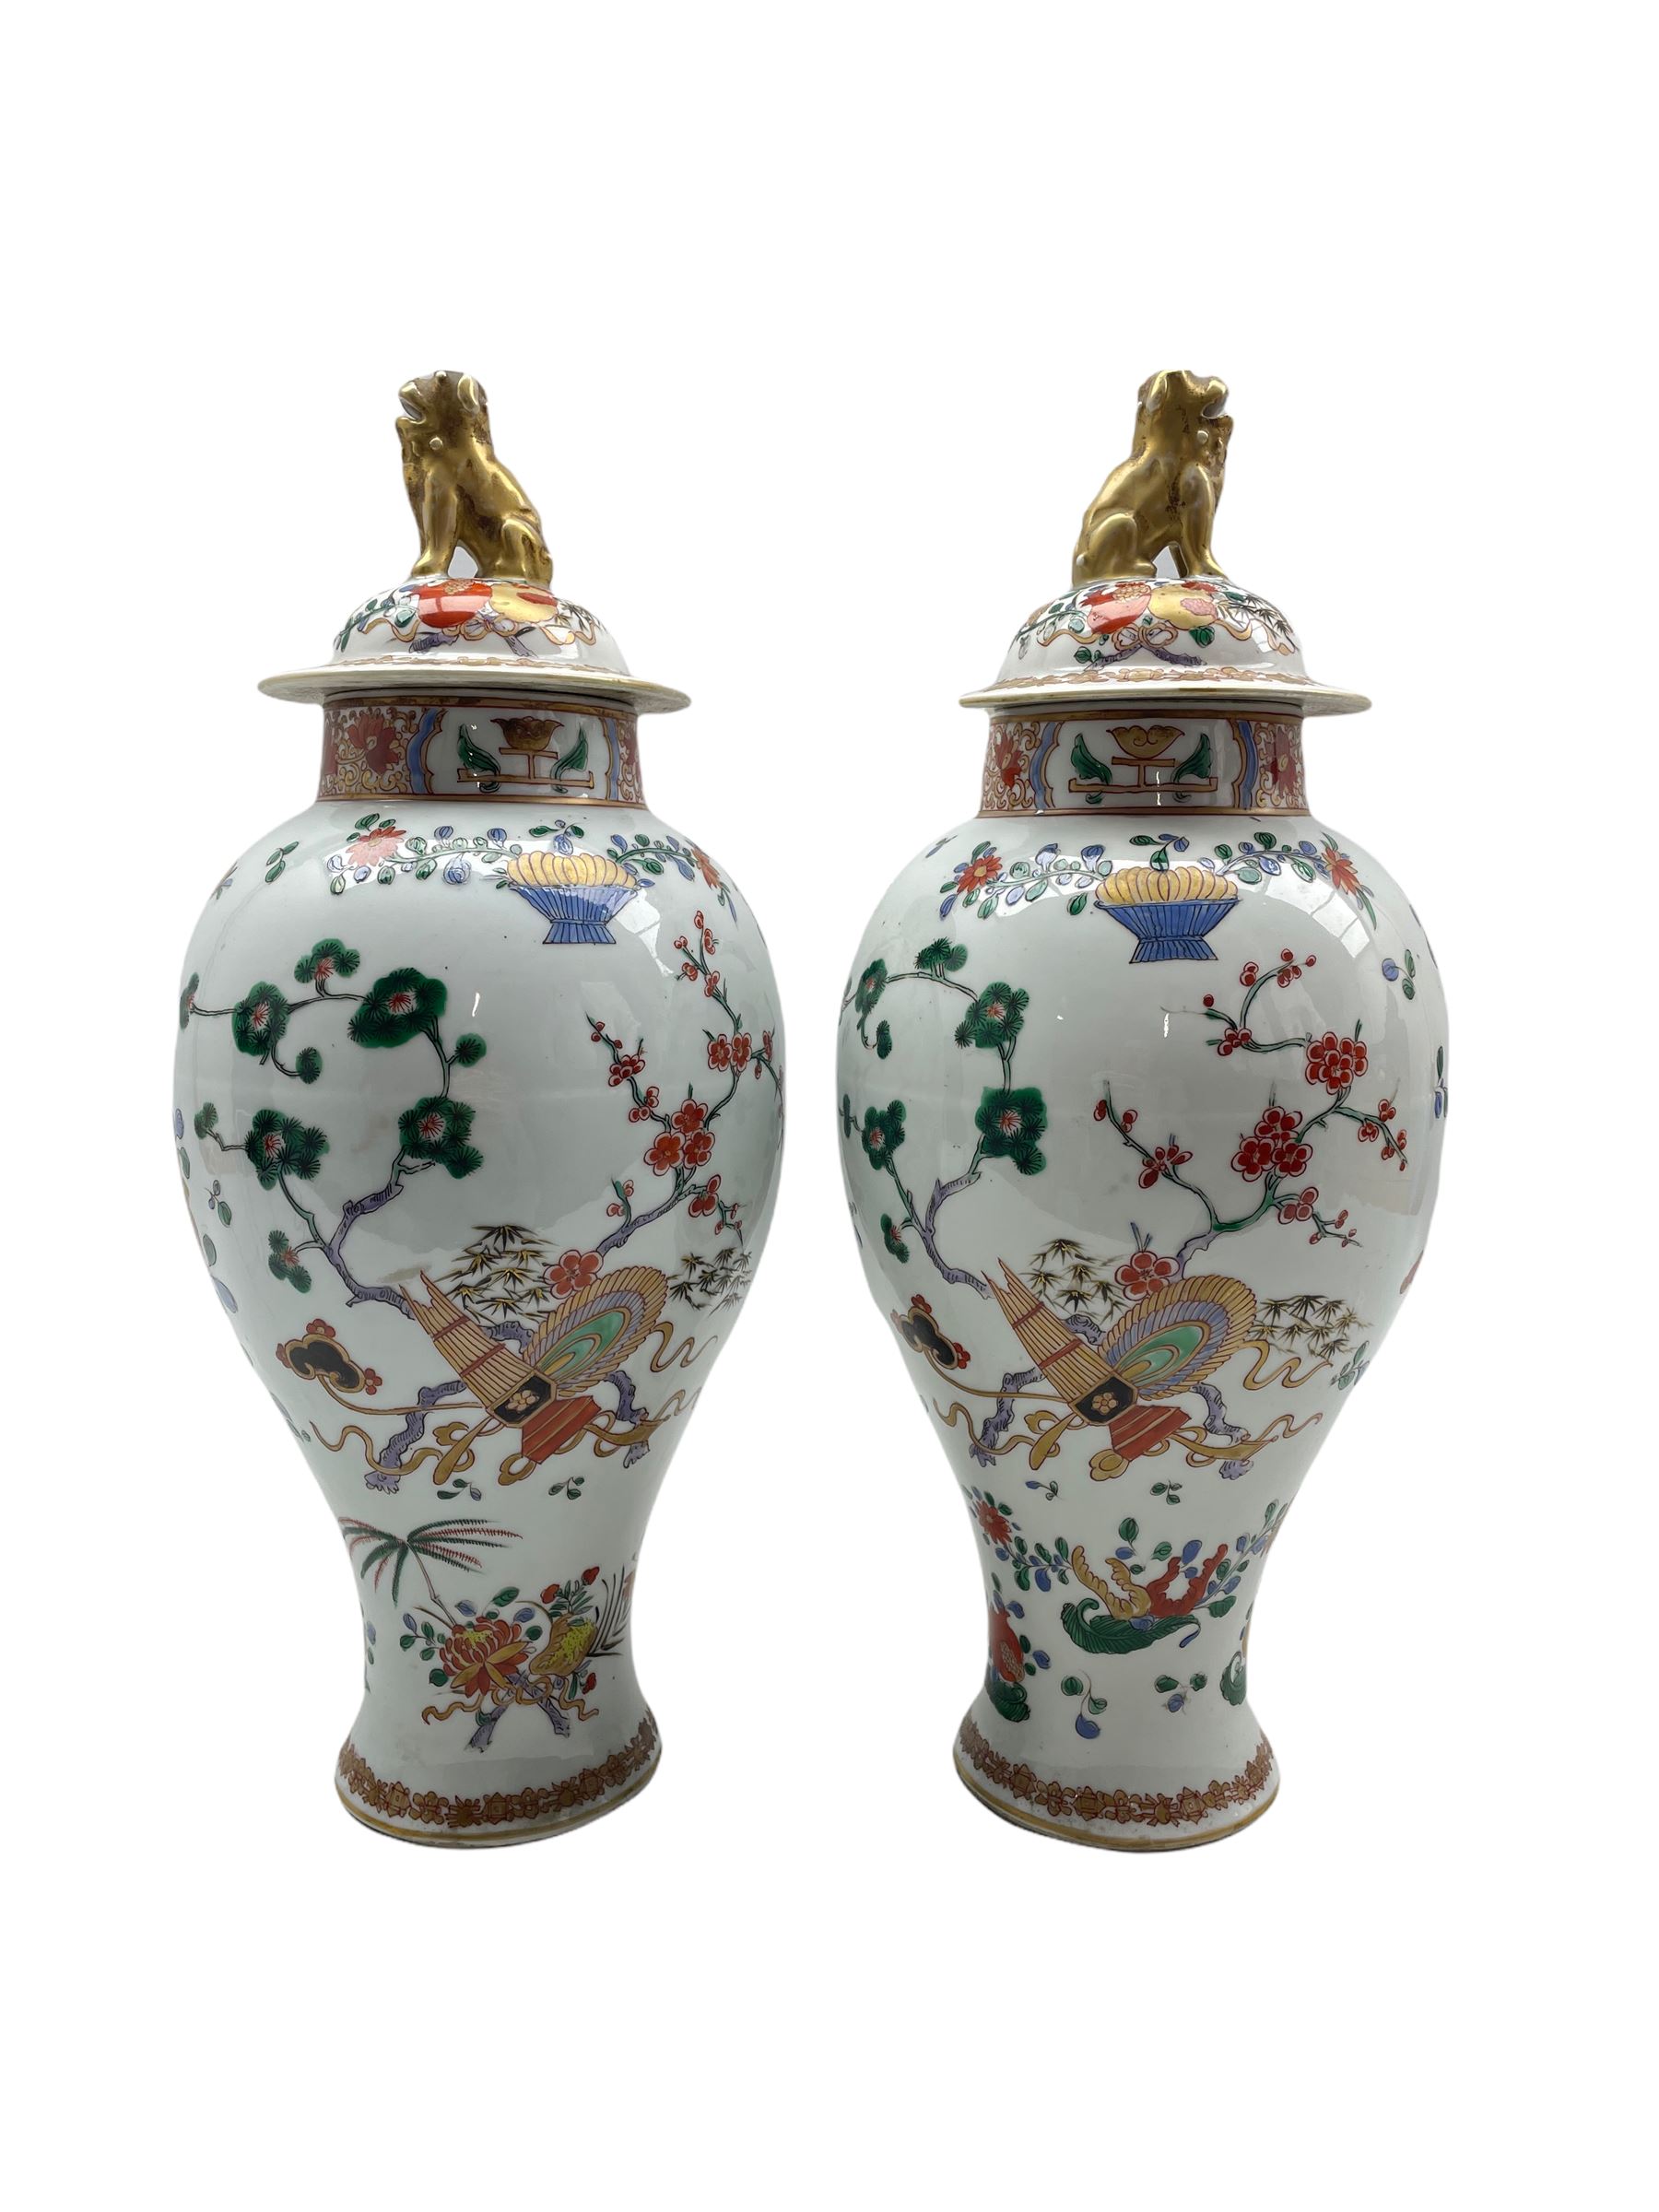 Pair of 19th century Samson of Paris armorial vases and covers decorated in the Chinese manner with - Image 2 of 3